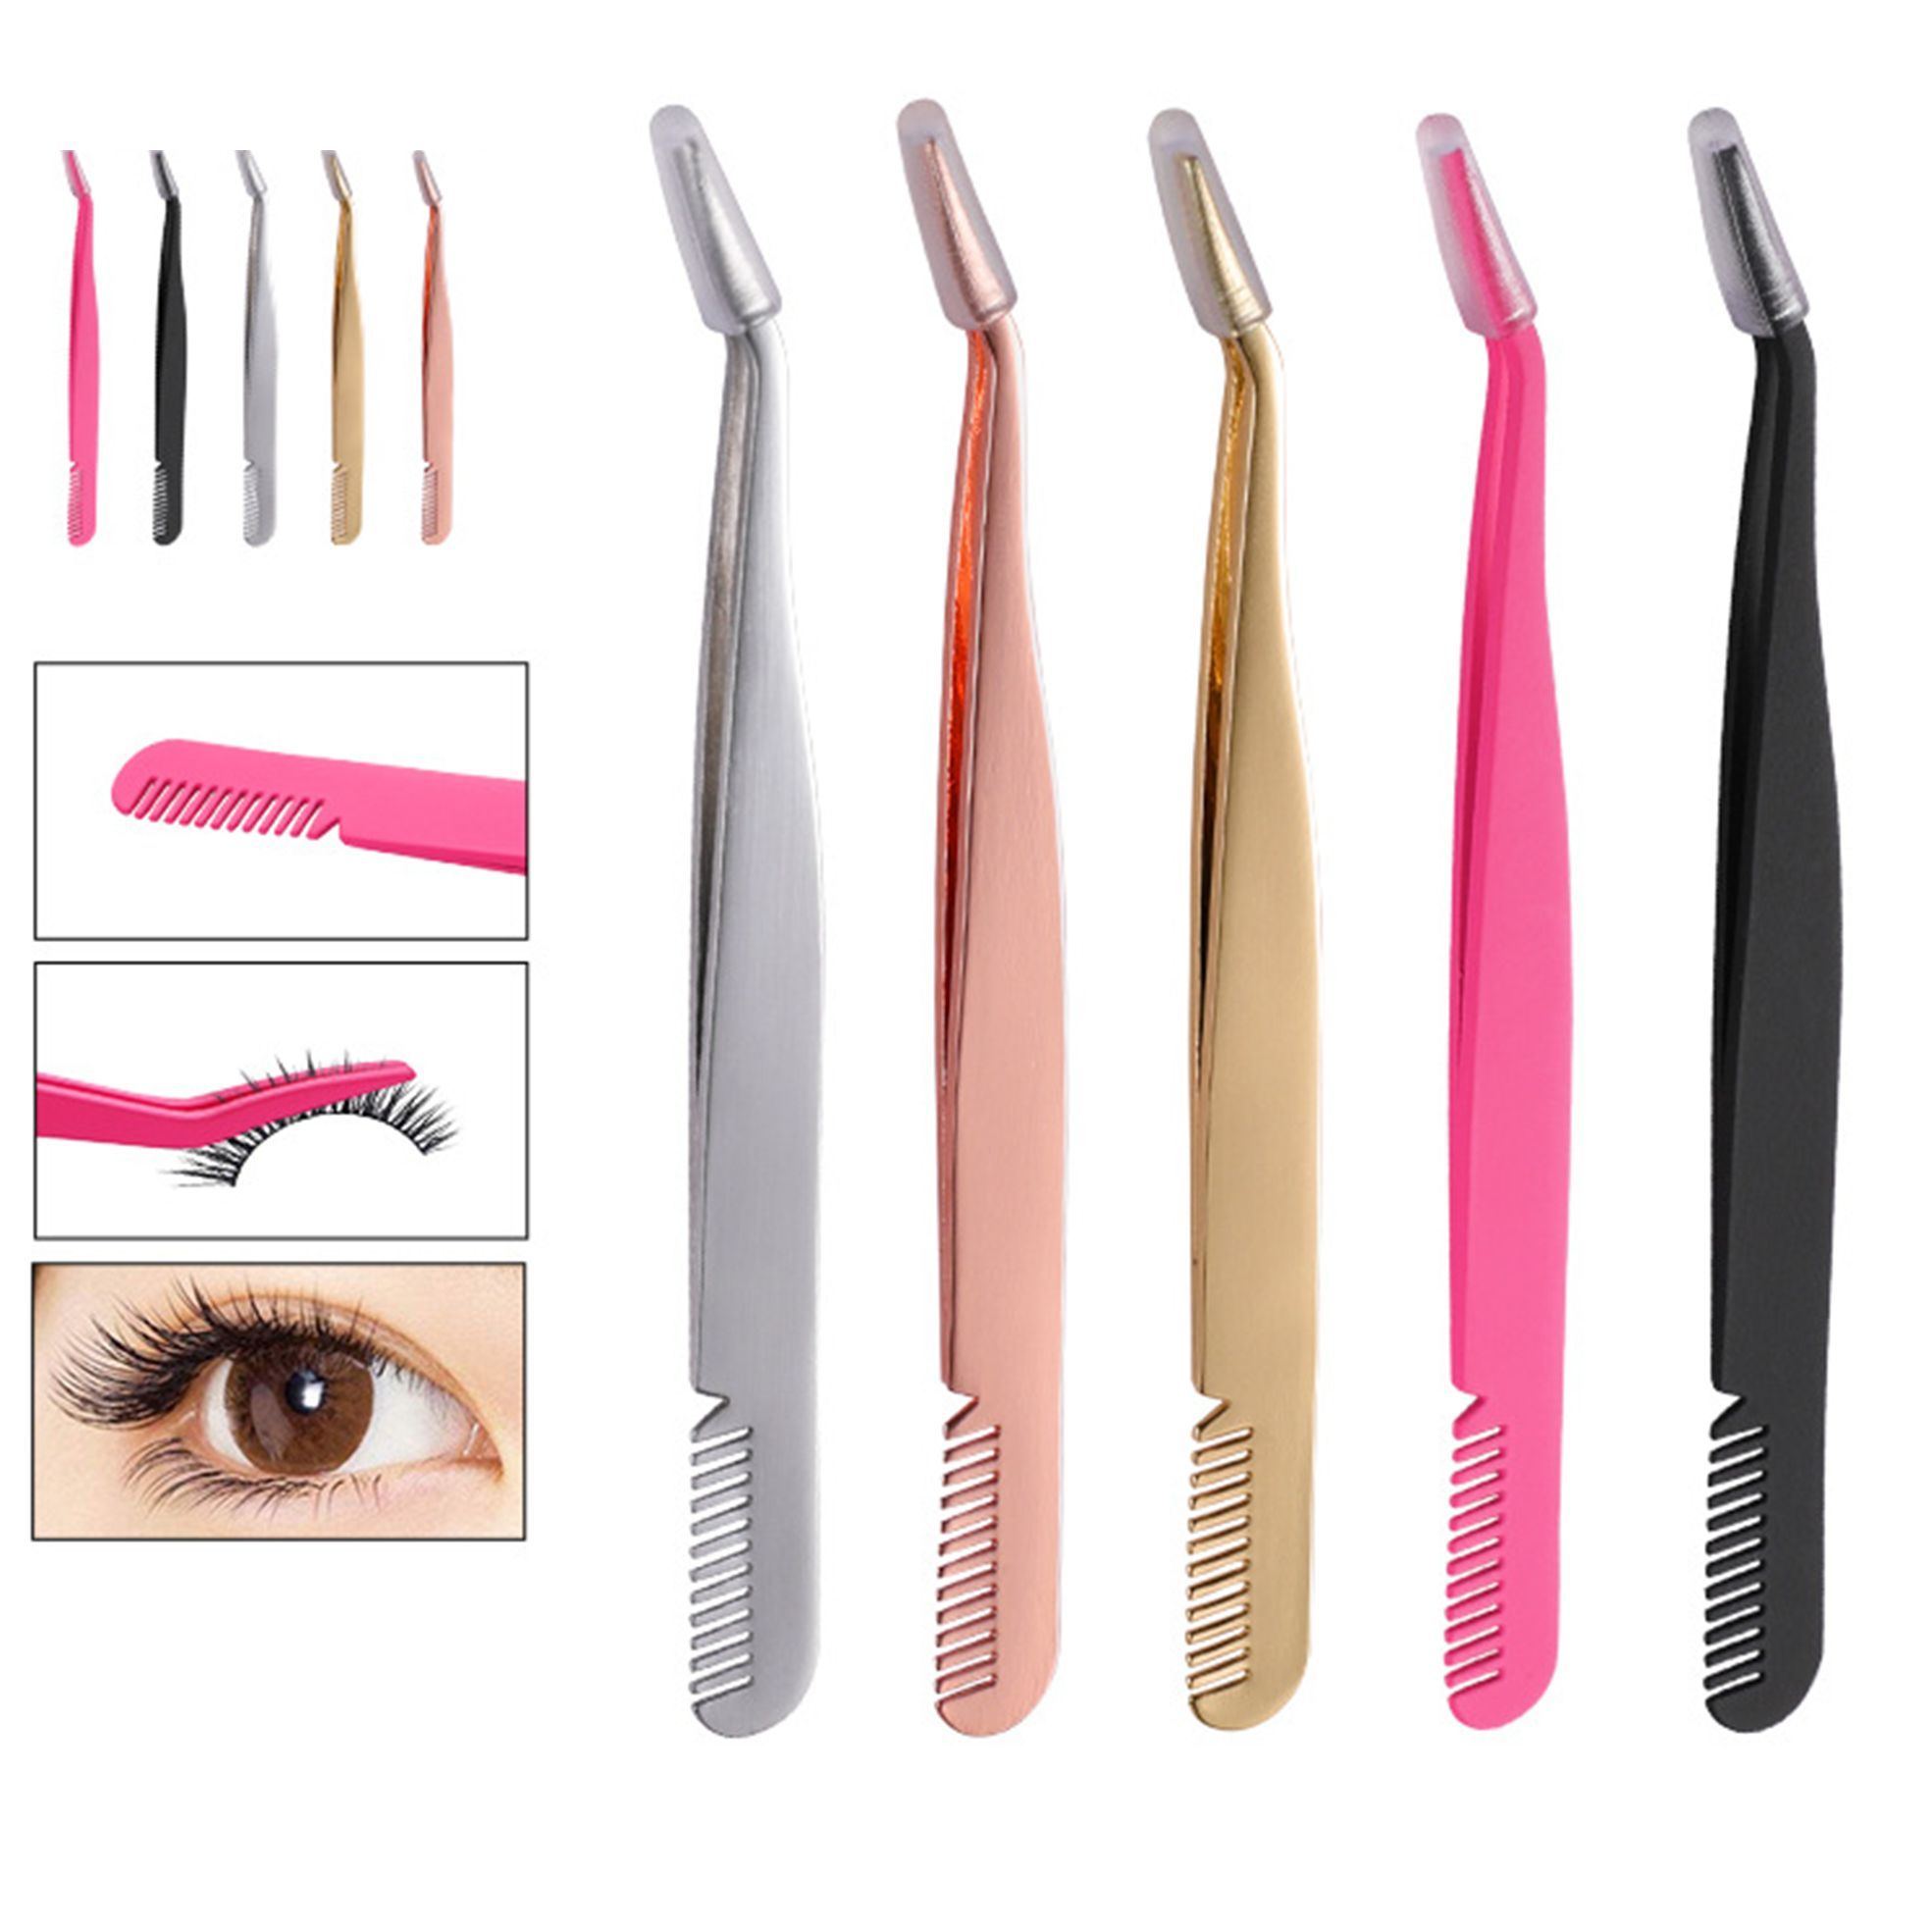 CUANFENGS28 Toiletry Kits Pinzette Clip Eyelashes Extension Curved Pointed Tweezers Tweezers for Eyelash Extension Stainless Steel Professional Eyebrow Tweezer Eyebrow Brush Comb